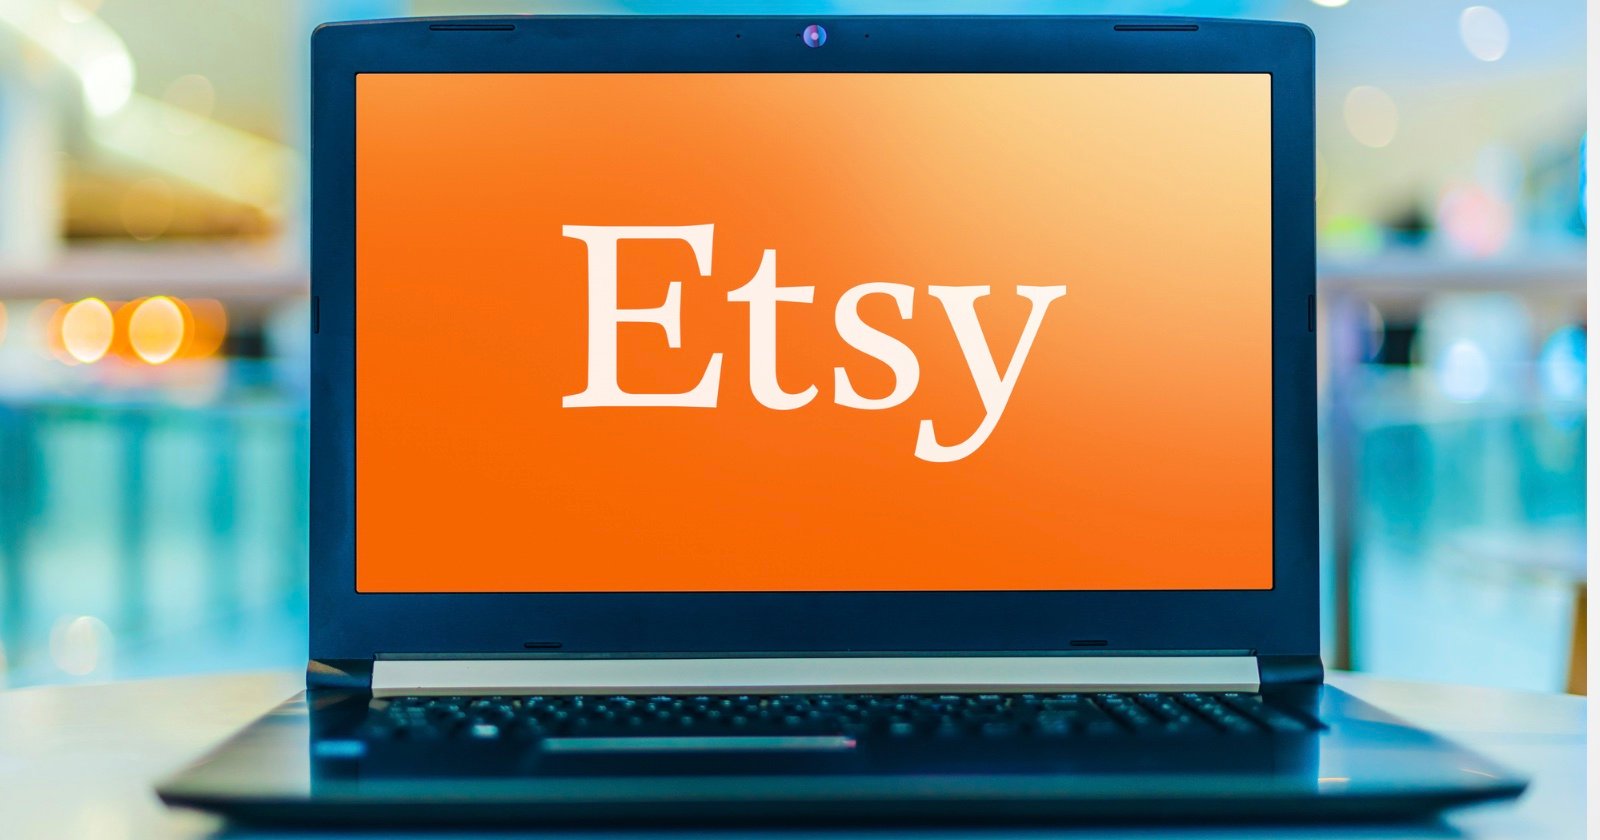 Etsy Has Been Selling Deepfake Pornographic Images of Celebrities